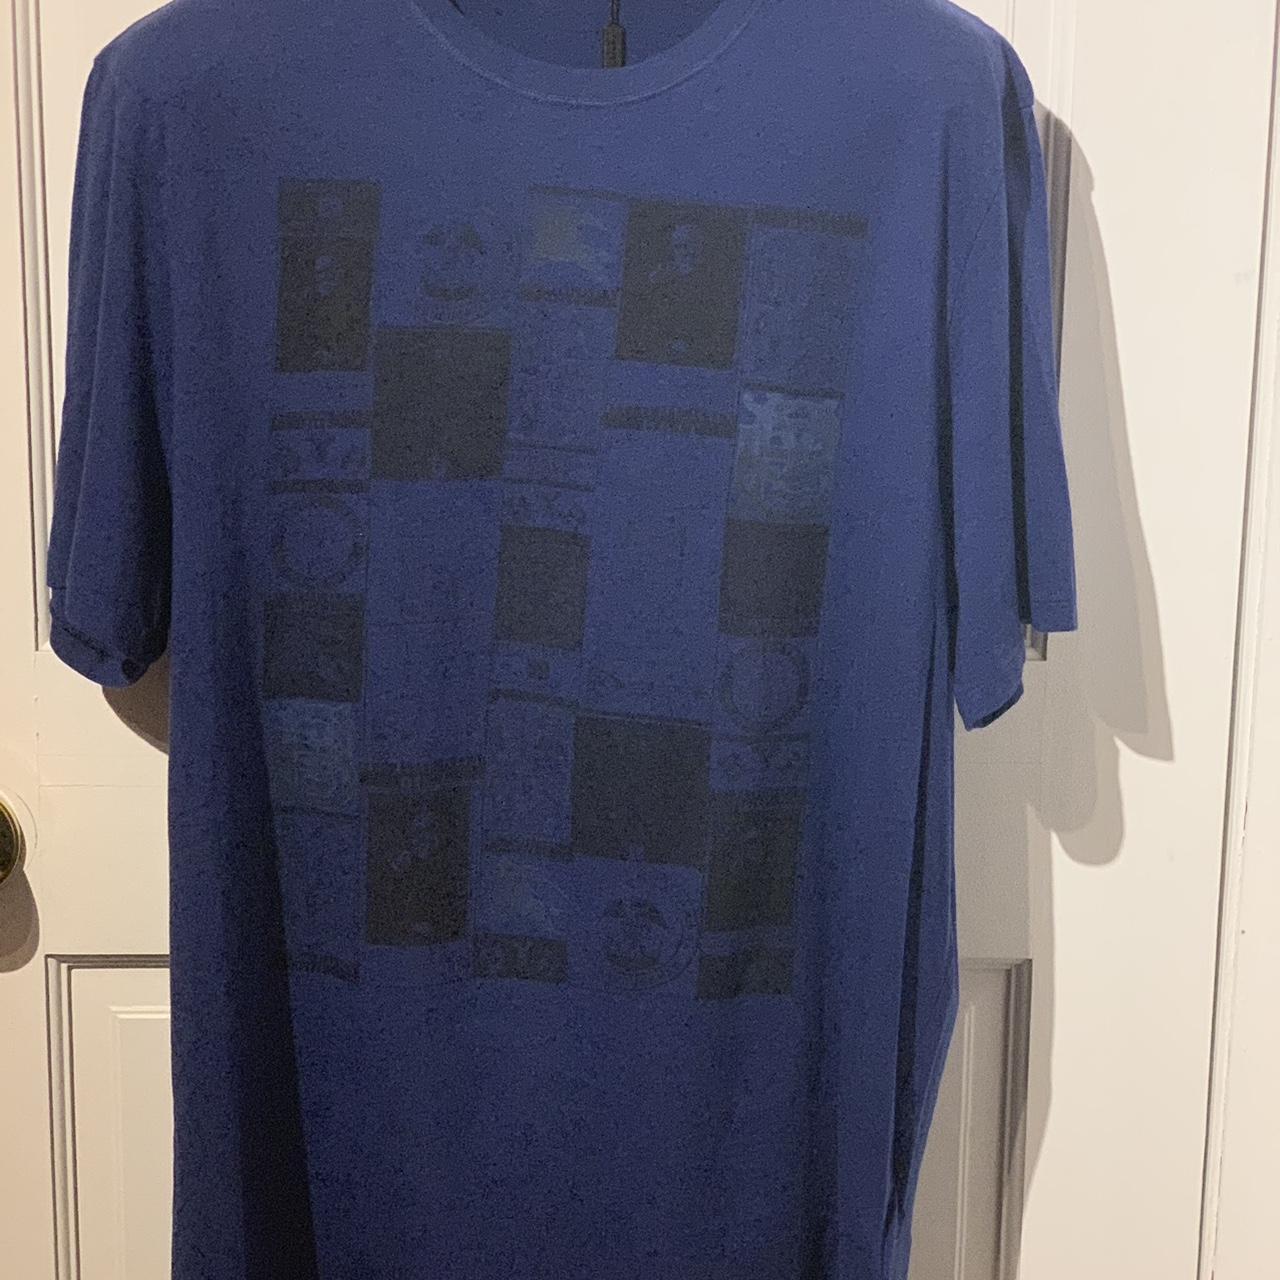 Burberry history of the logo tee, •Size XXL, •New with...